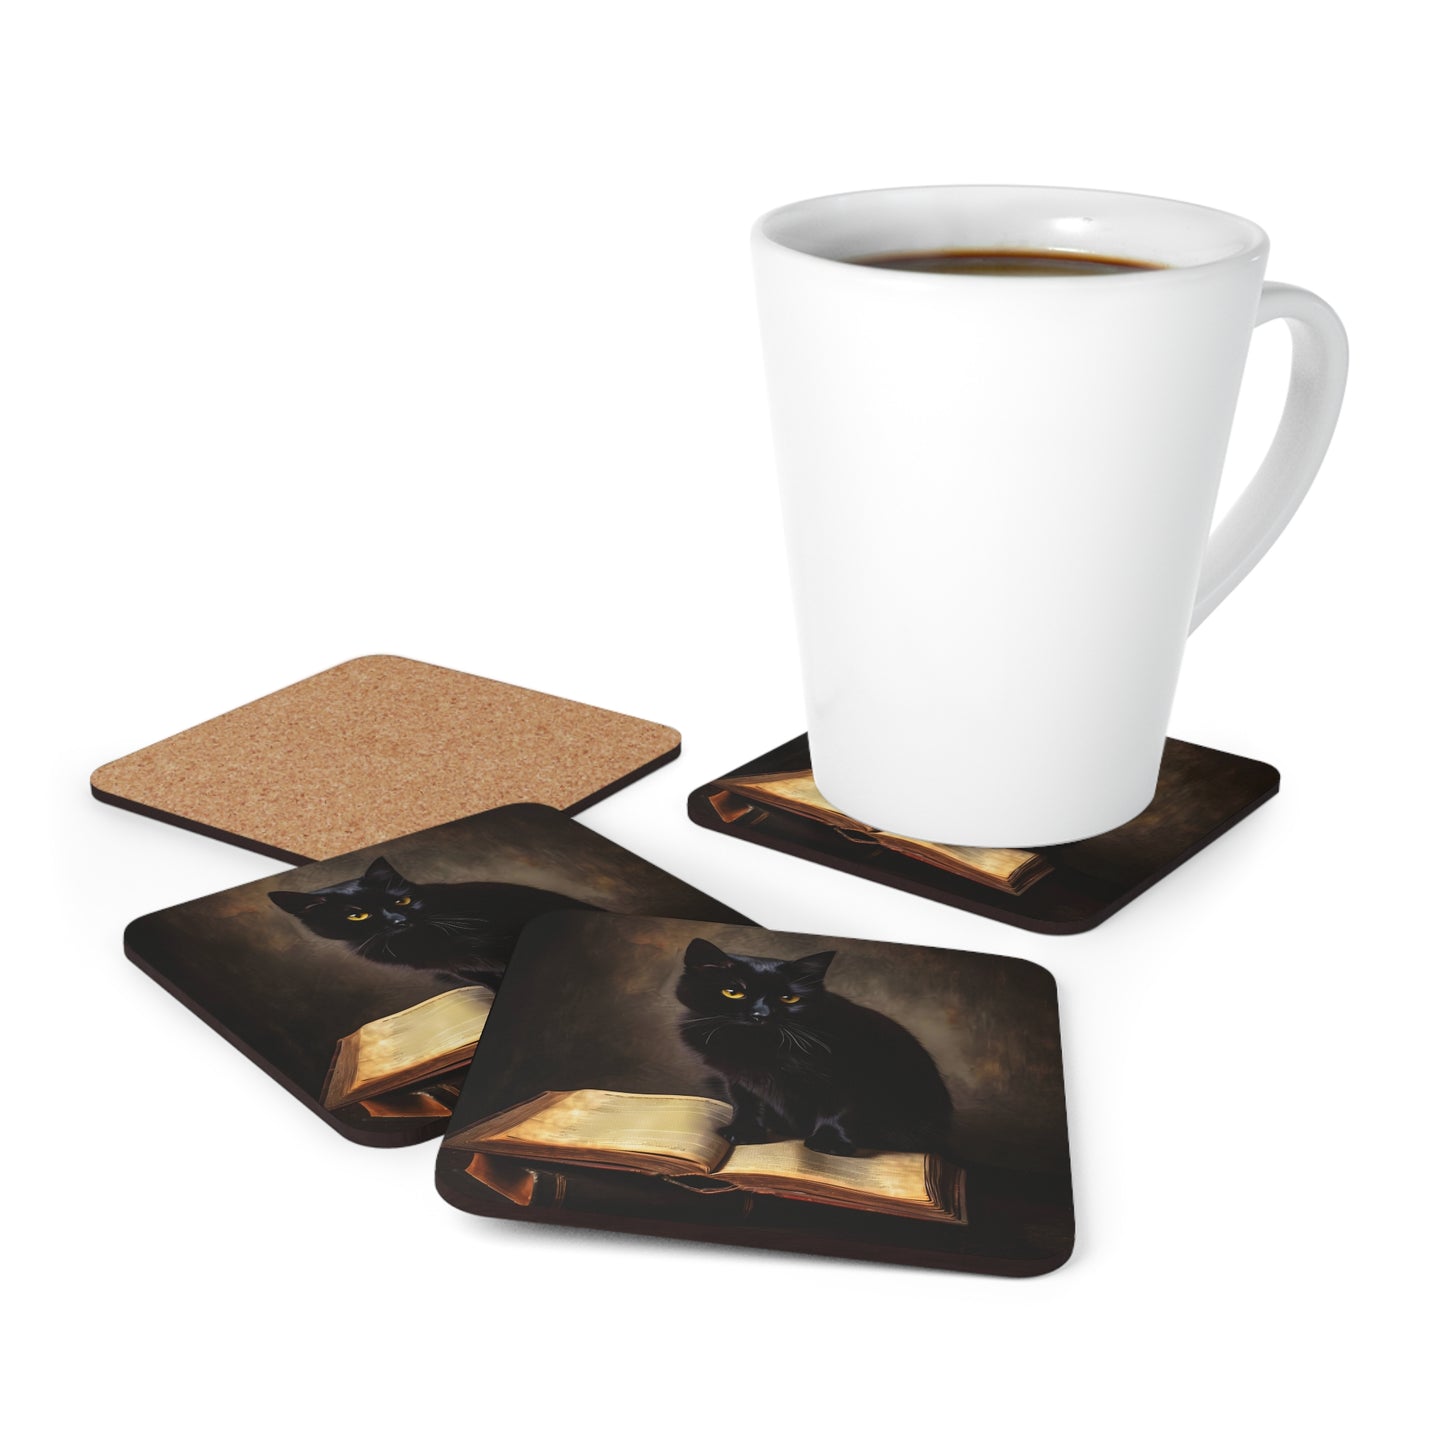 Black Cat with Books | Set of 4 Coasters